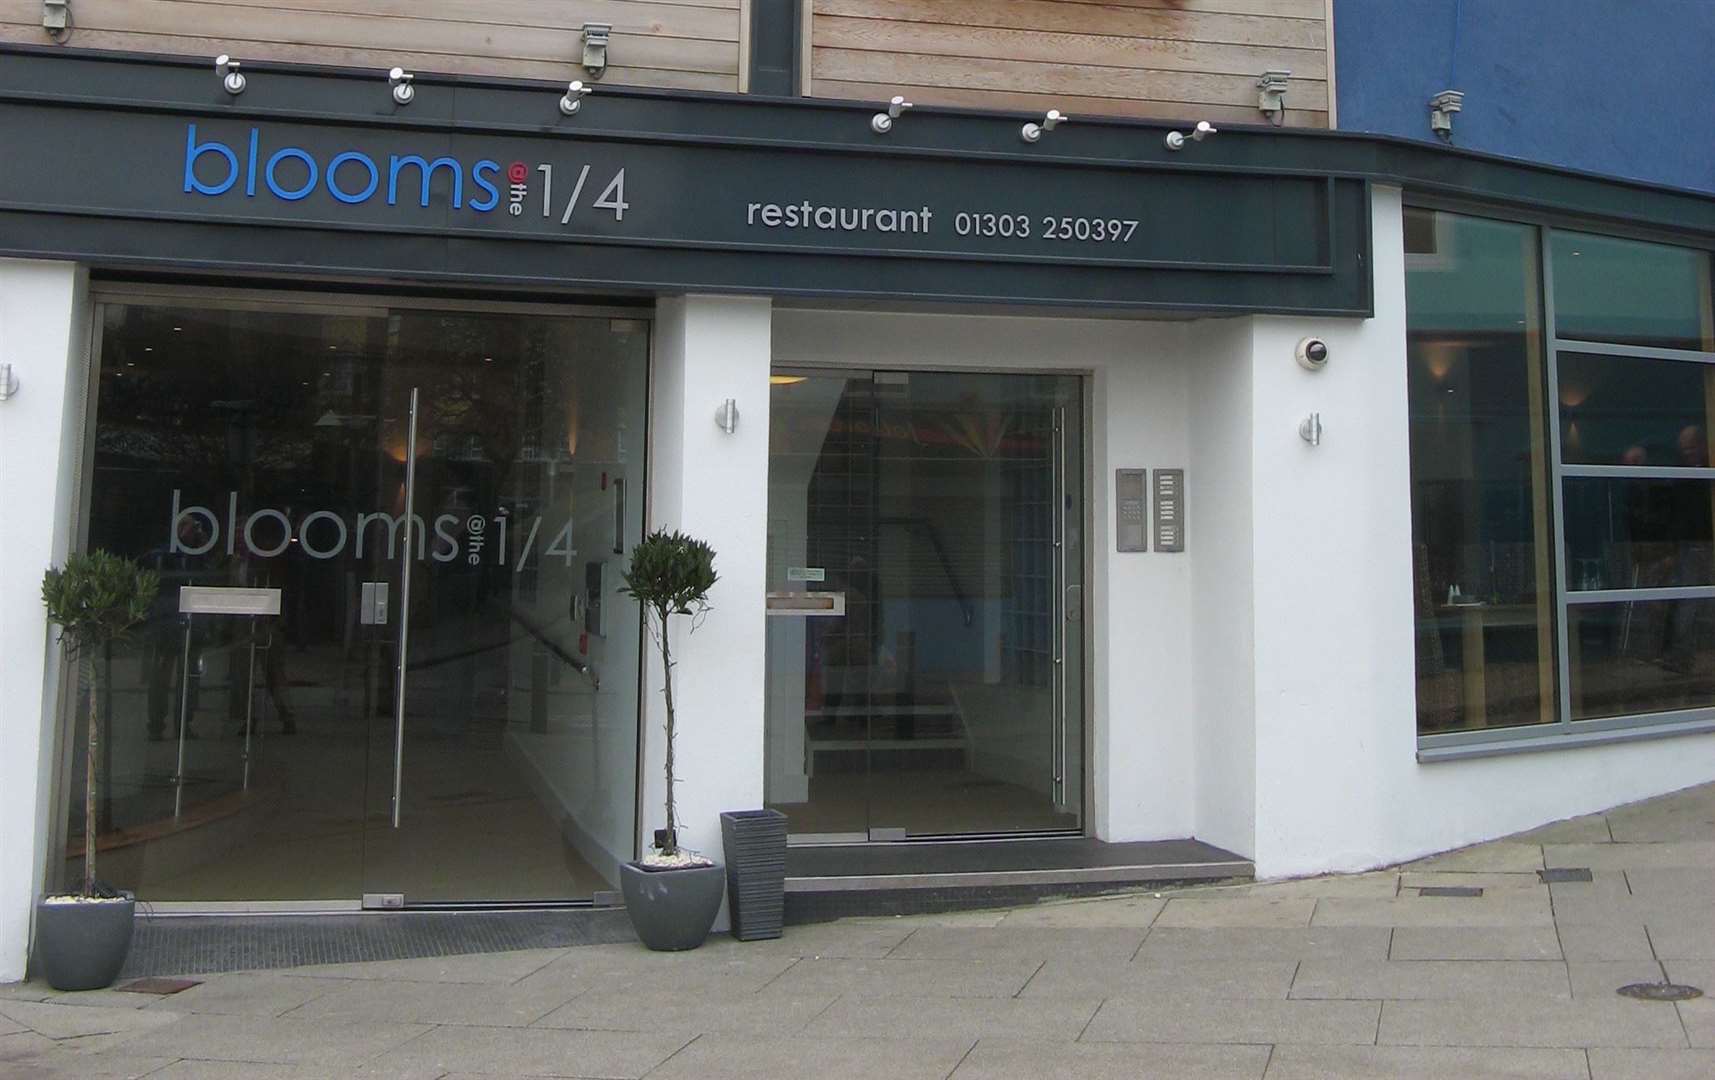 Blooms @ the 1/4 in the Old High Street, Folkestone, will close today